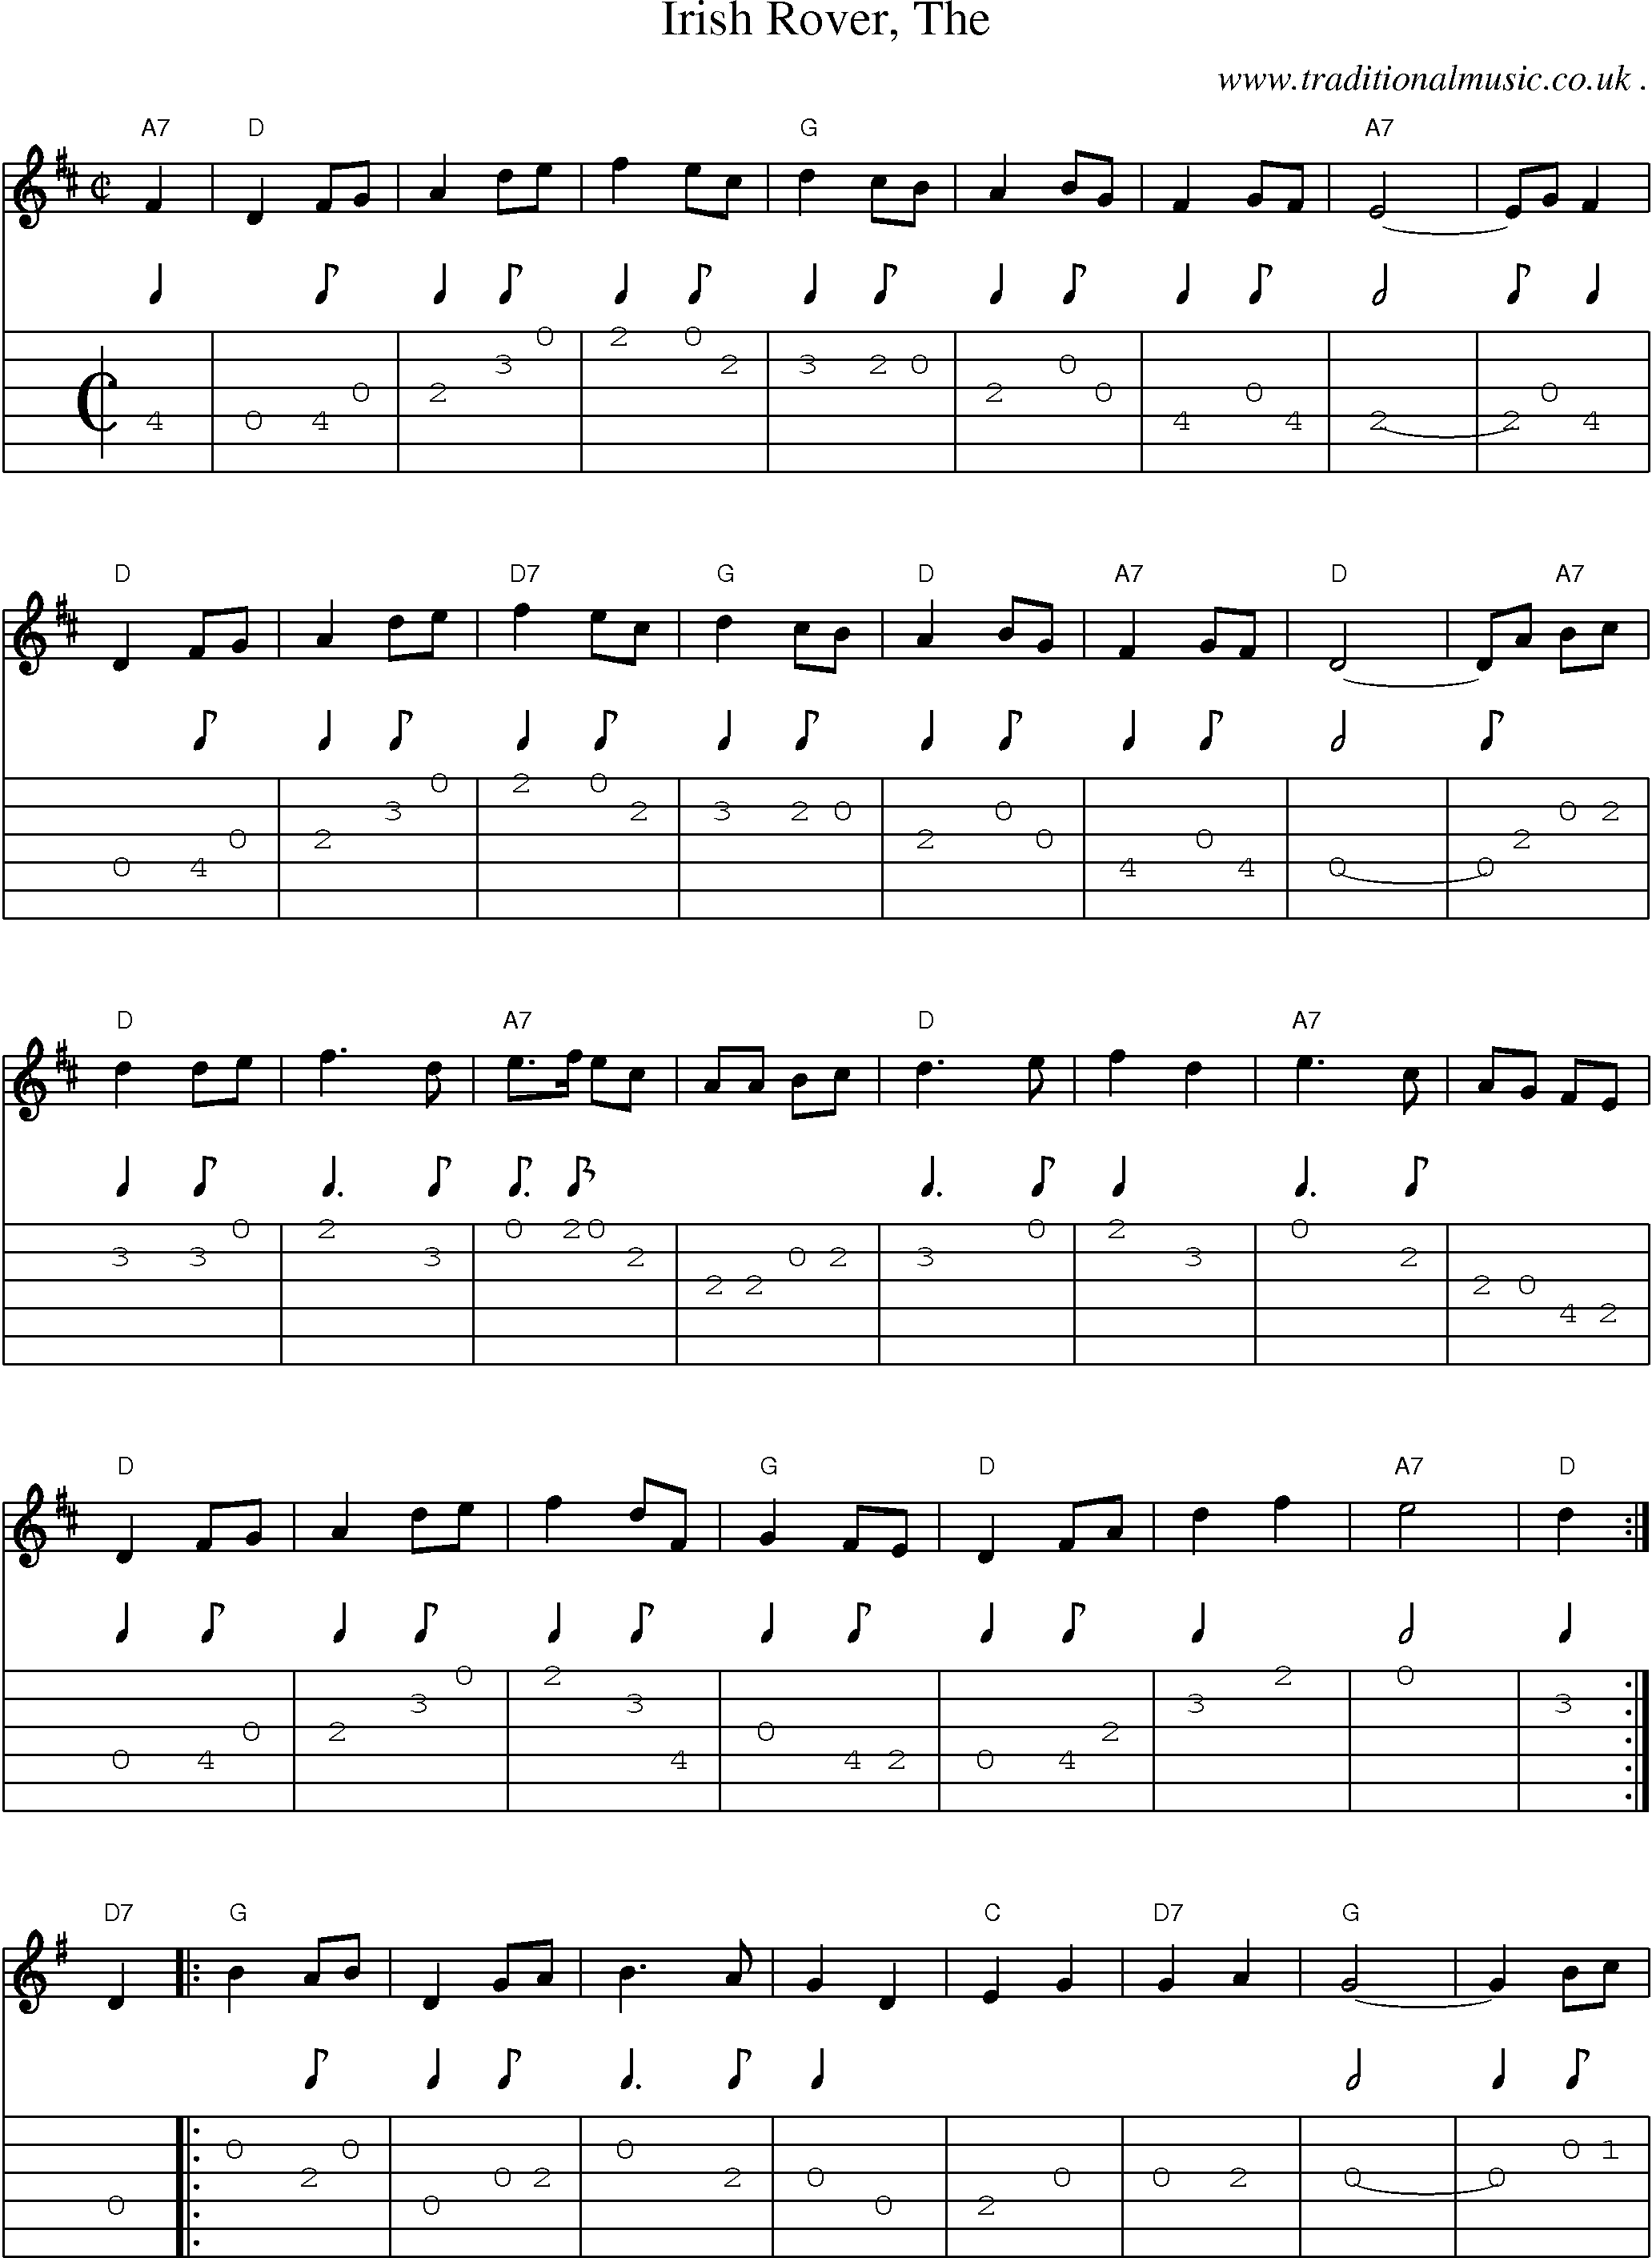 Music Score and Guitar Tabs for Irish Rover The